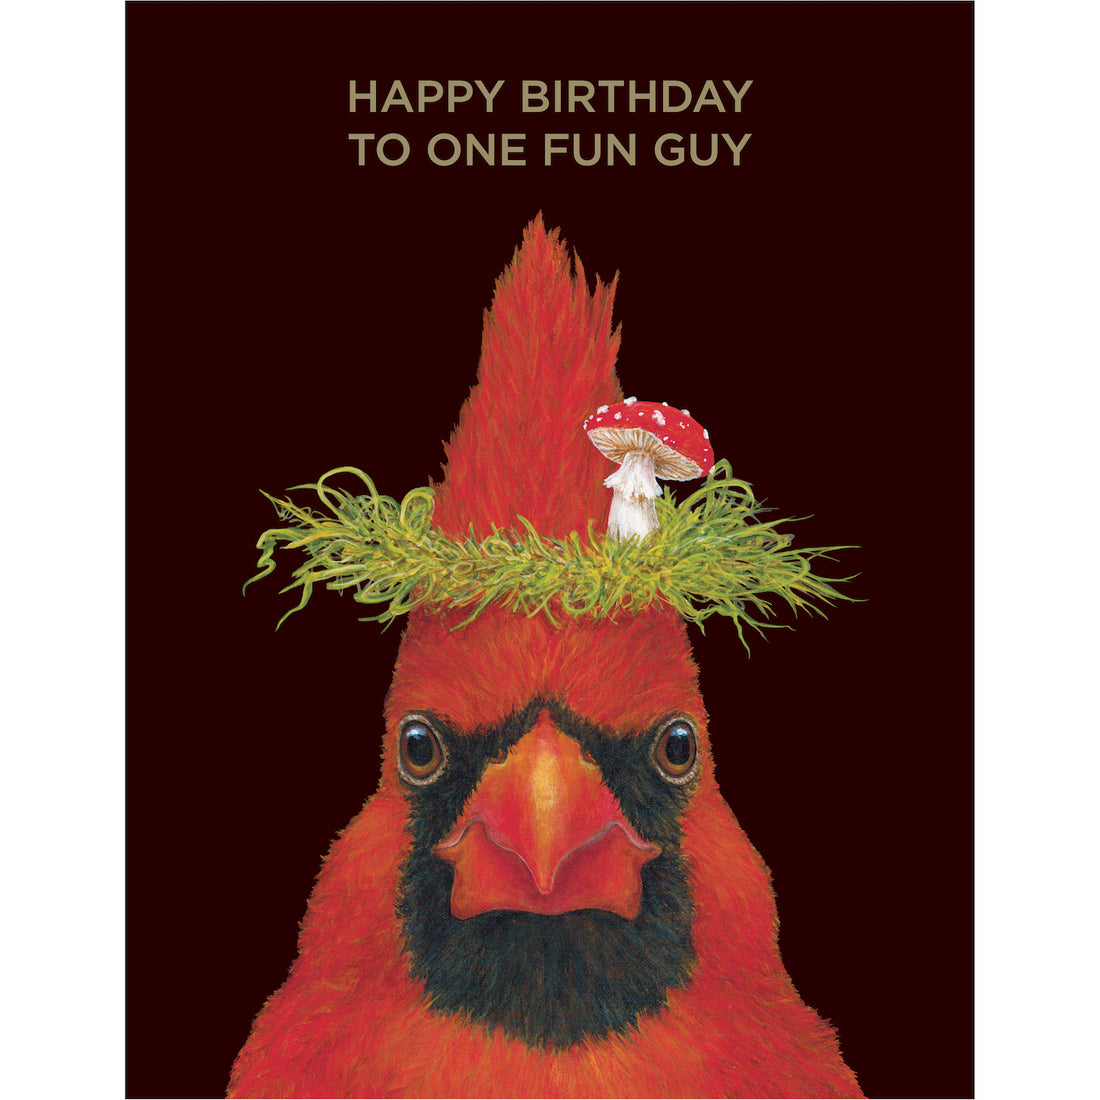 A whimsical red bird artistically adorned with a hat, the One Fun Guy Birthday Card by Hester &amp; Cook.